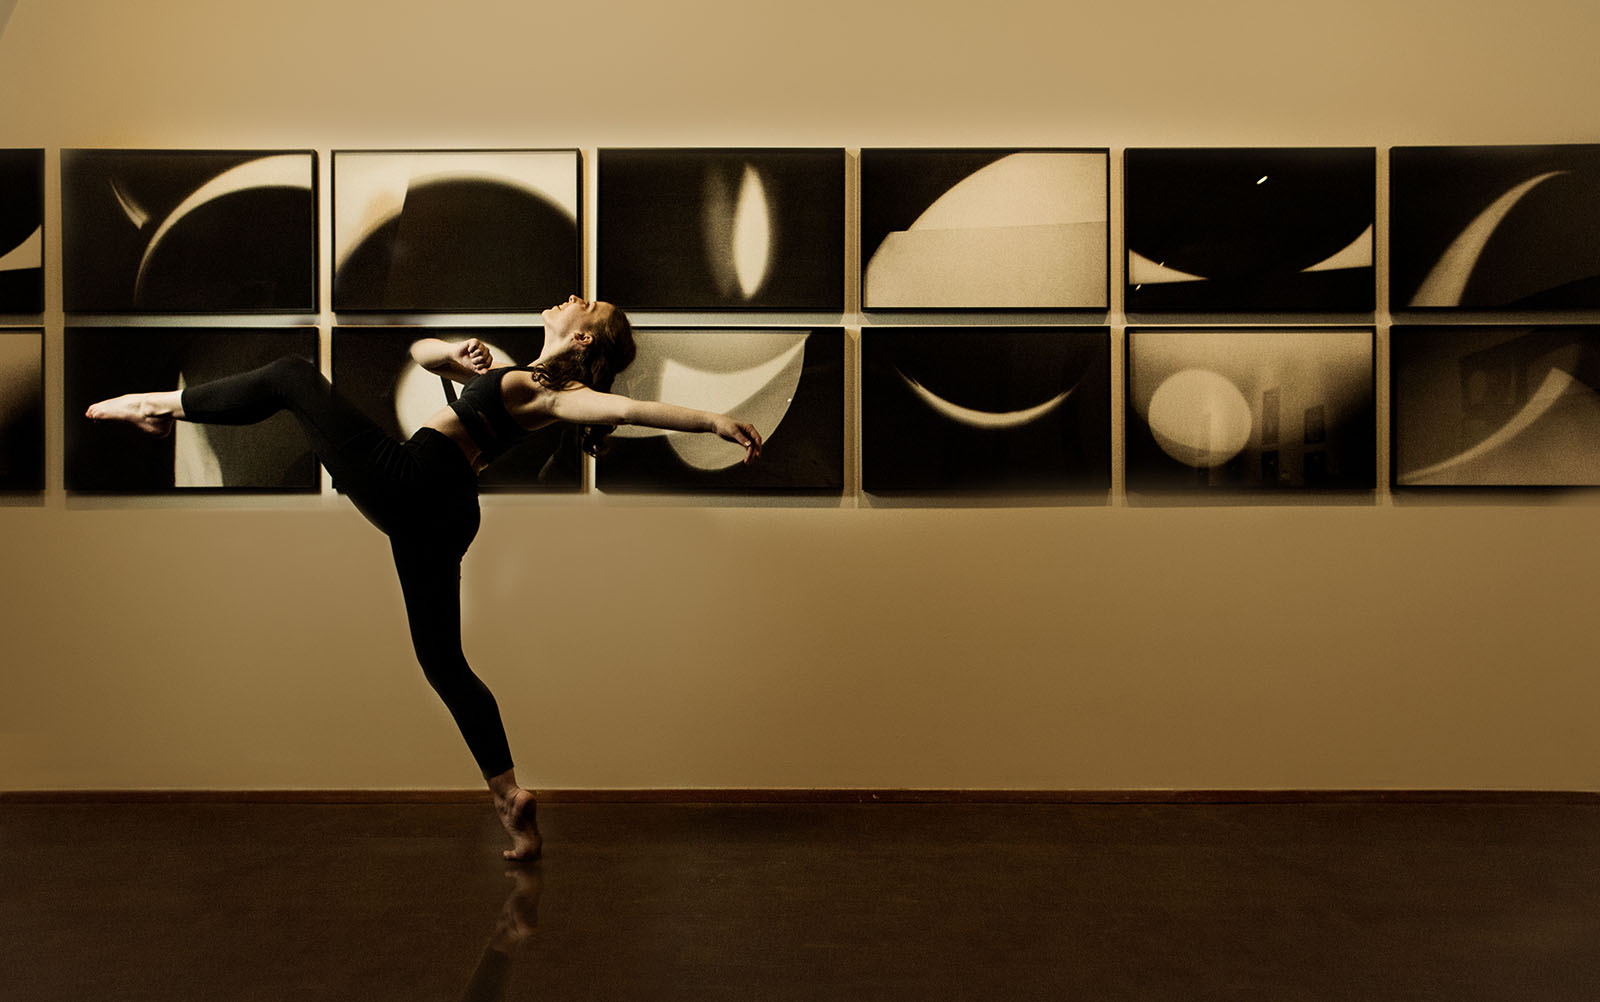 A dancer makes a dramatic movement which matches the shapes of images portrayed on the wall behind